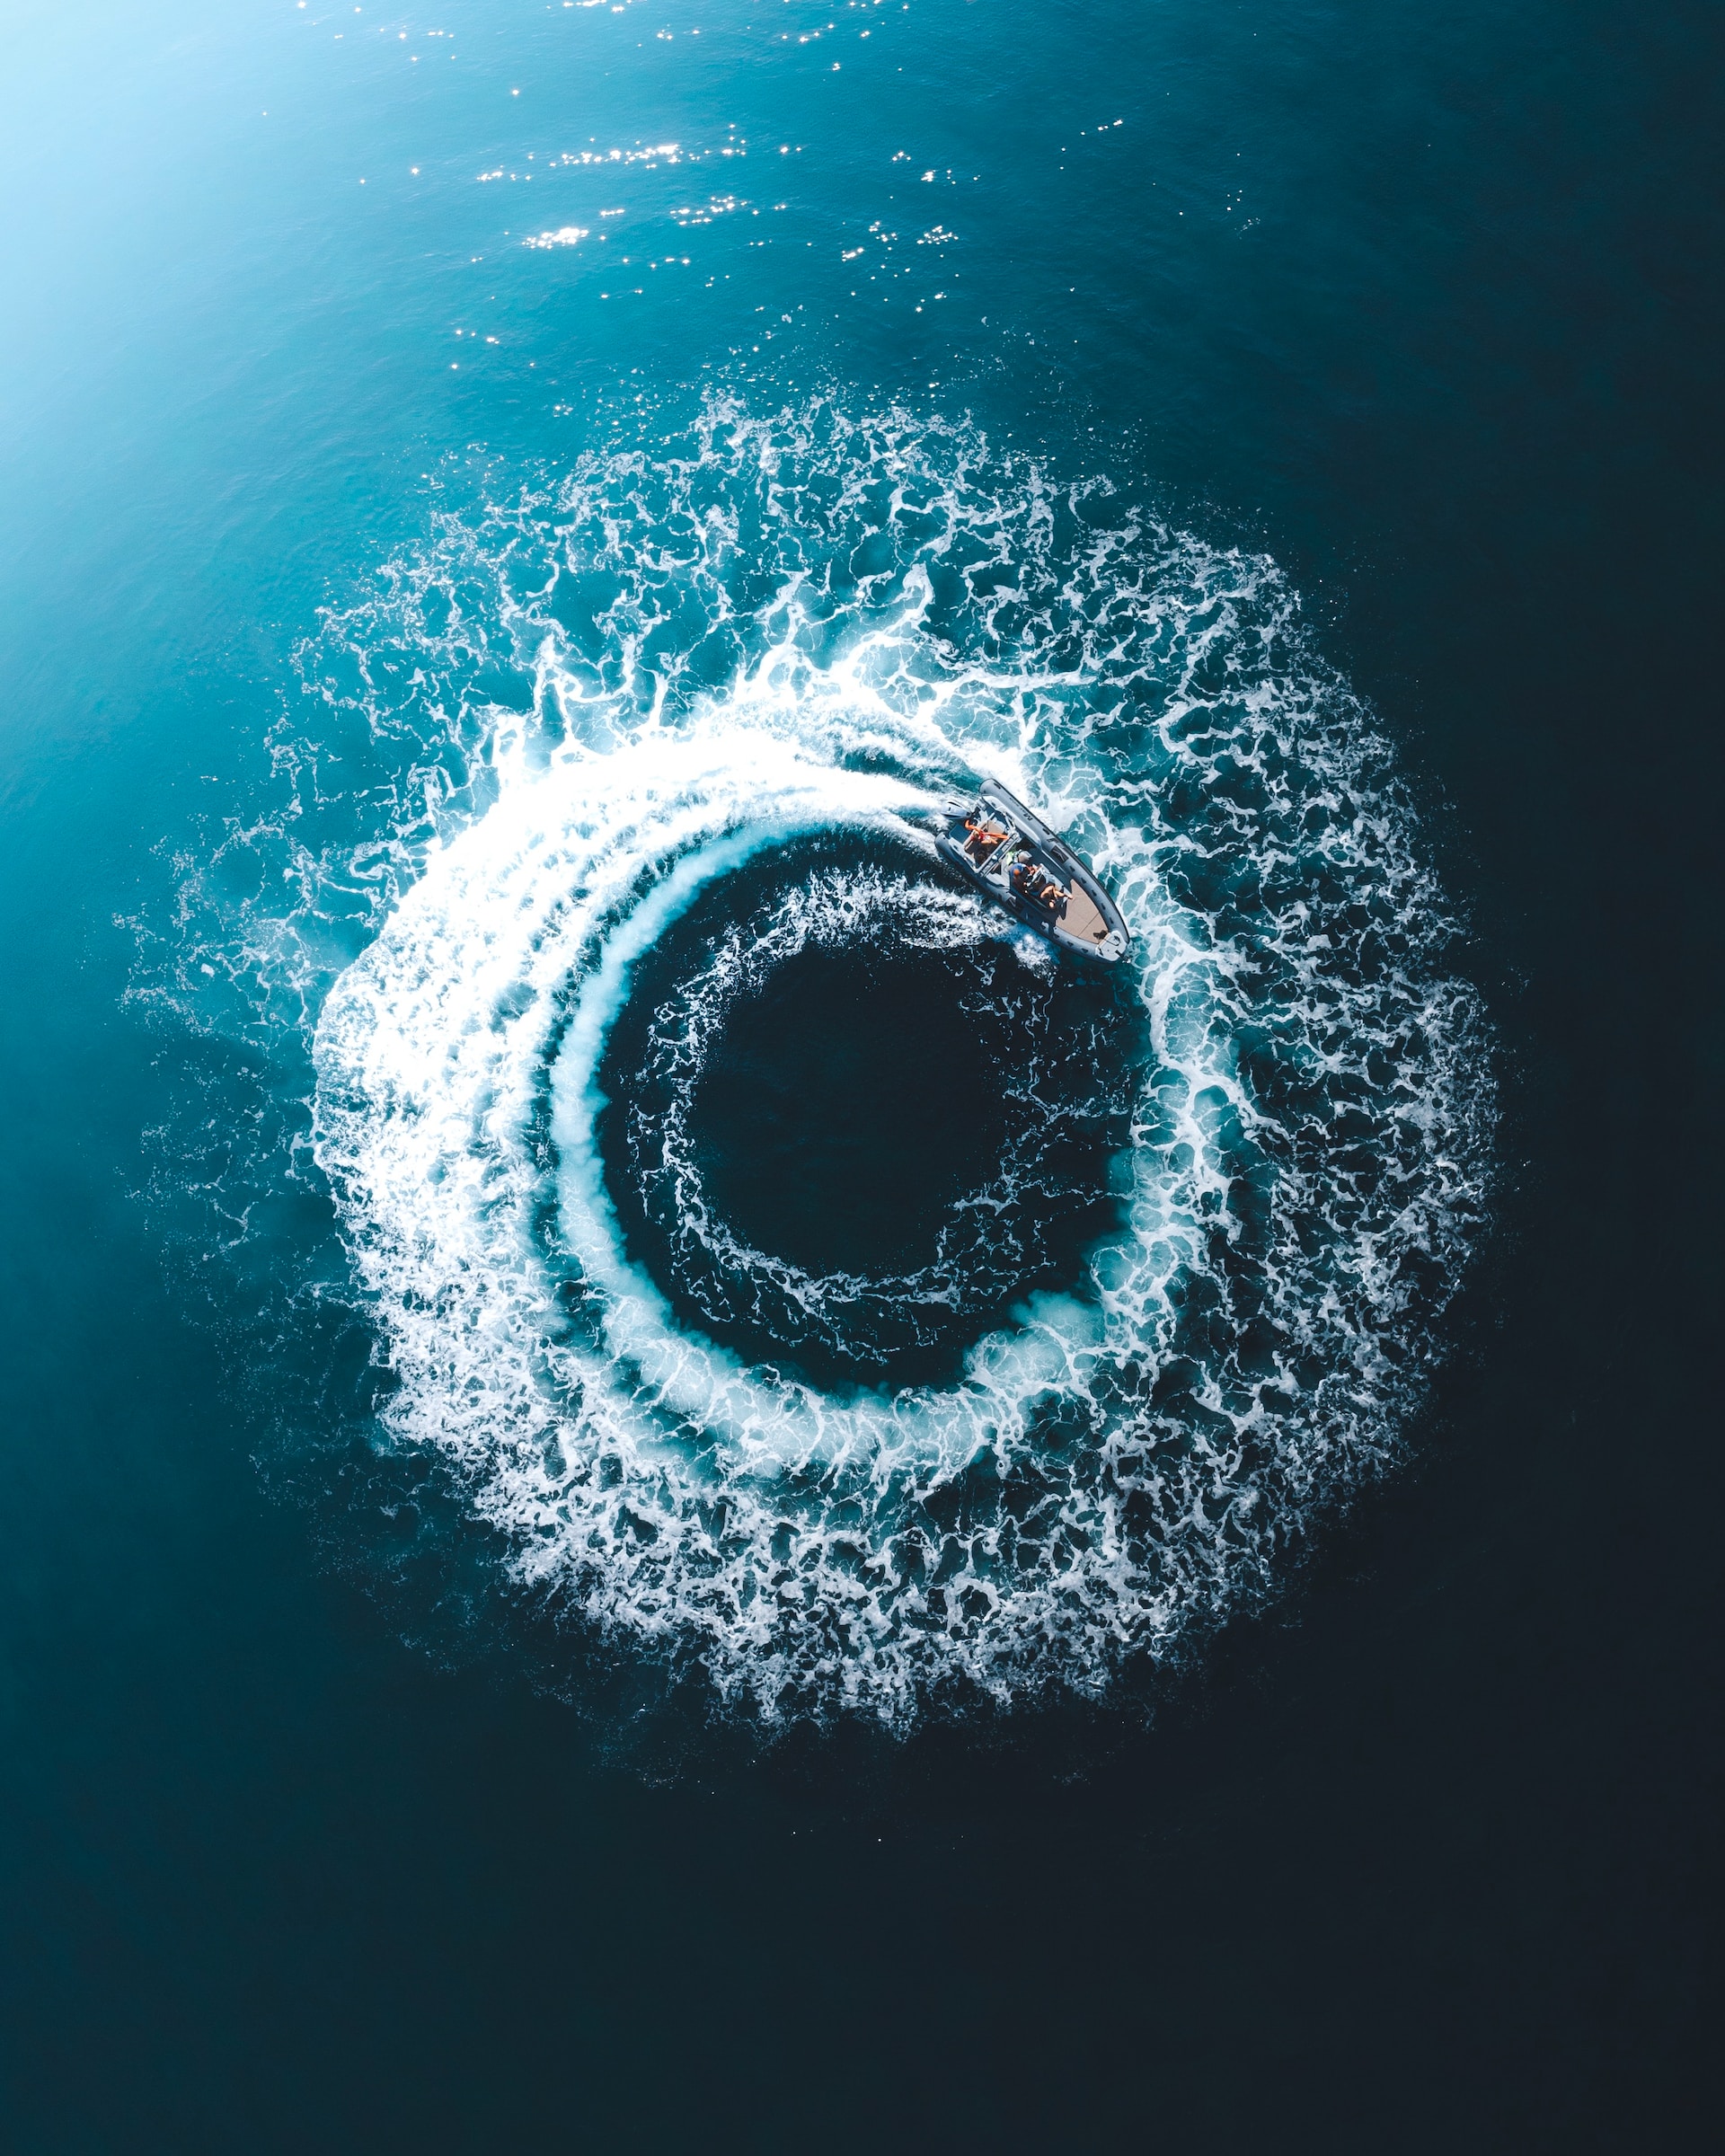 Overhead view looking down at a boat going in a circle with a wake that resembles the iris of an eye.